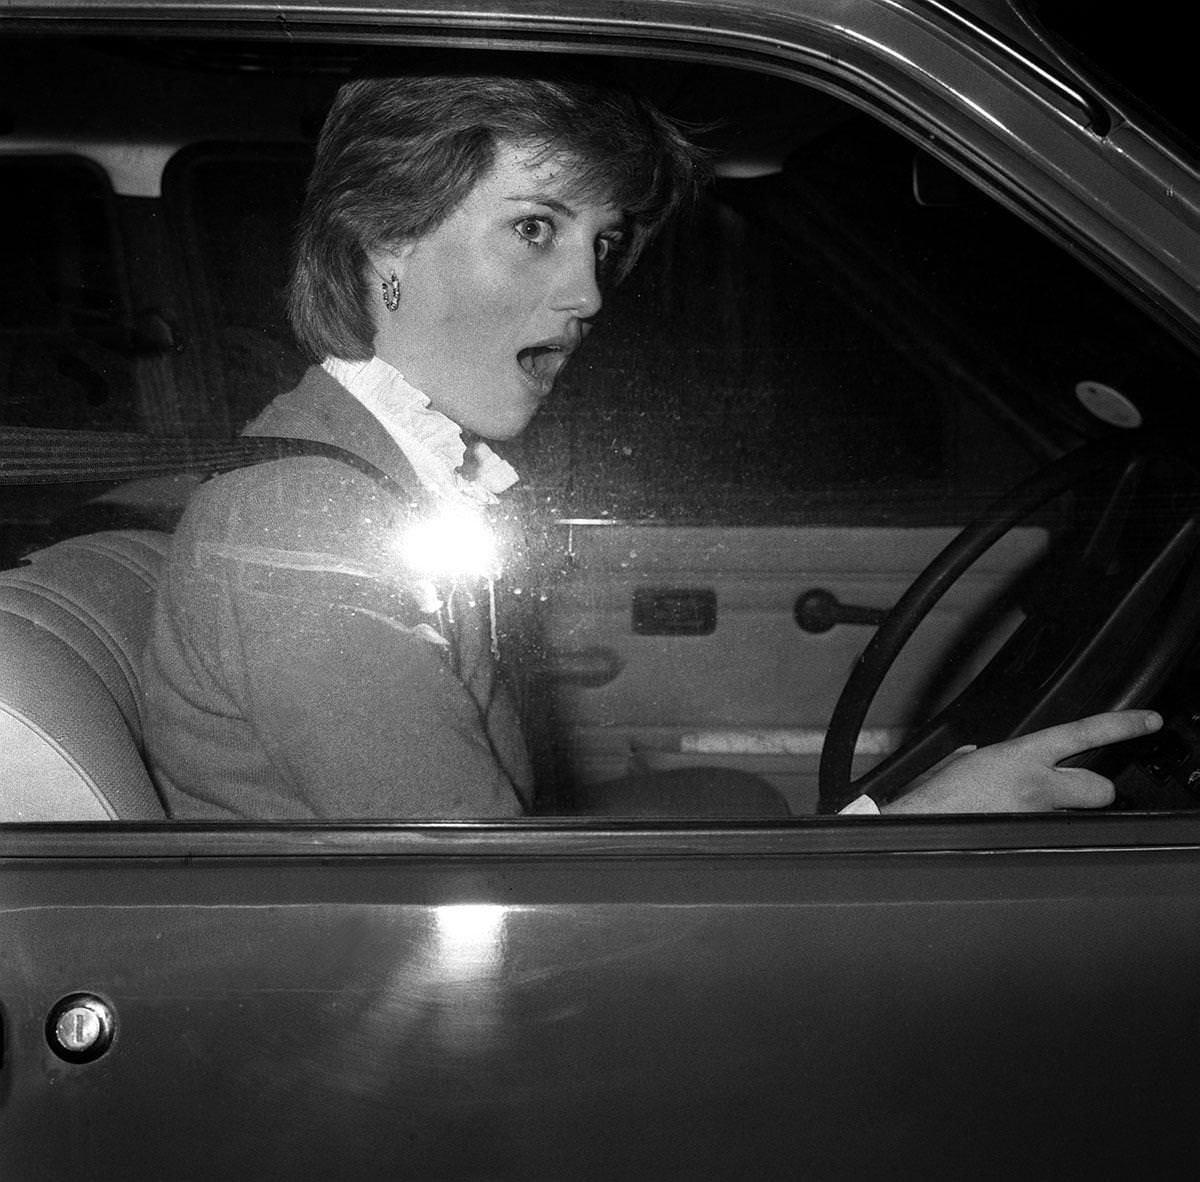 Lady Diana look of astonishment as she stalls her car - a new Mini Metro - outside her Earl's Court flat when leaving for her job as a teacher at a kindergarten in Pimlico, London.